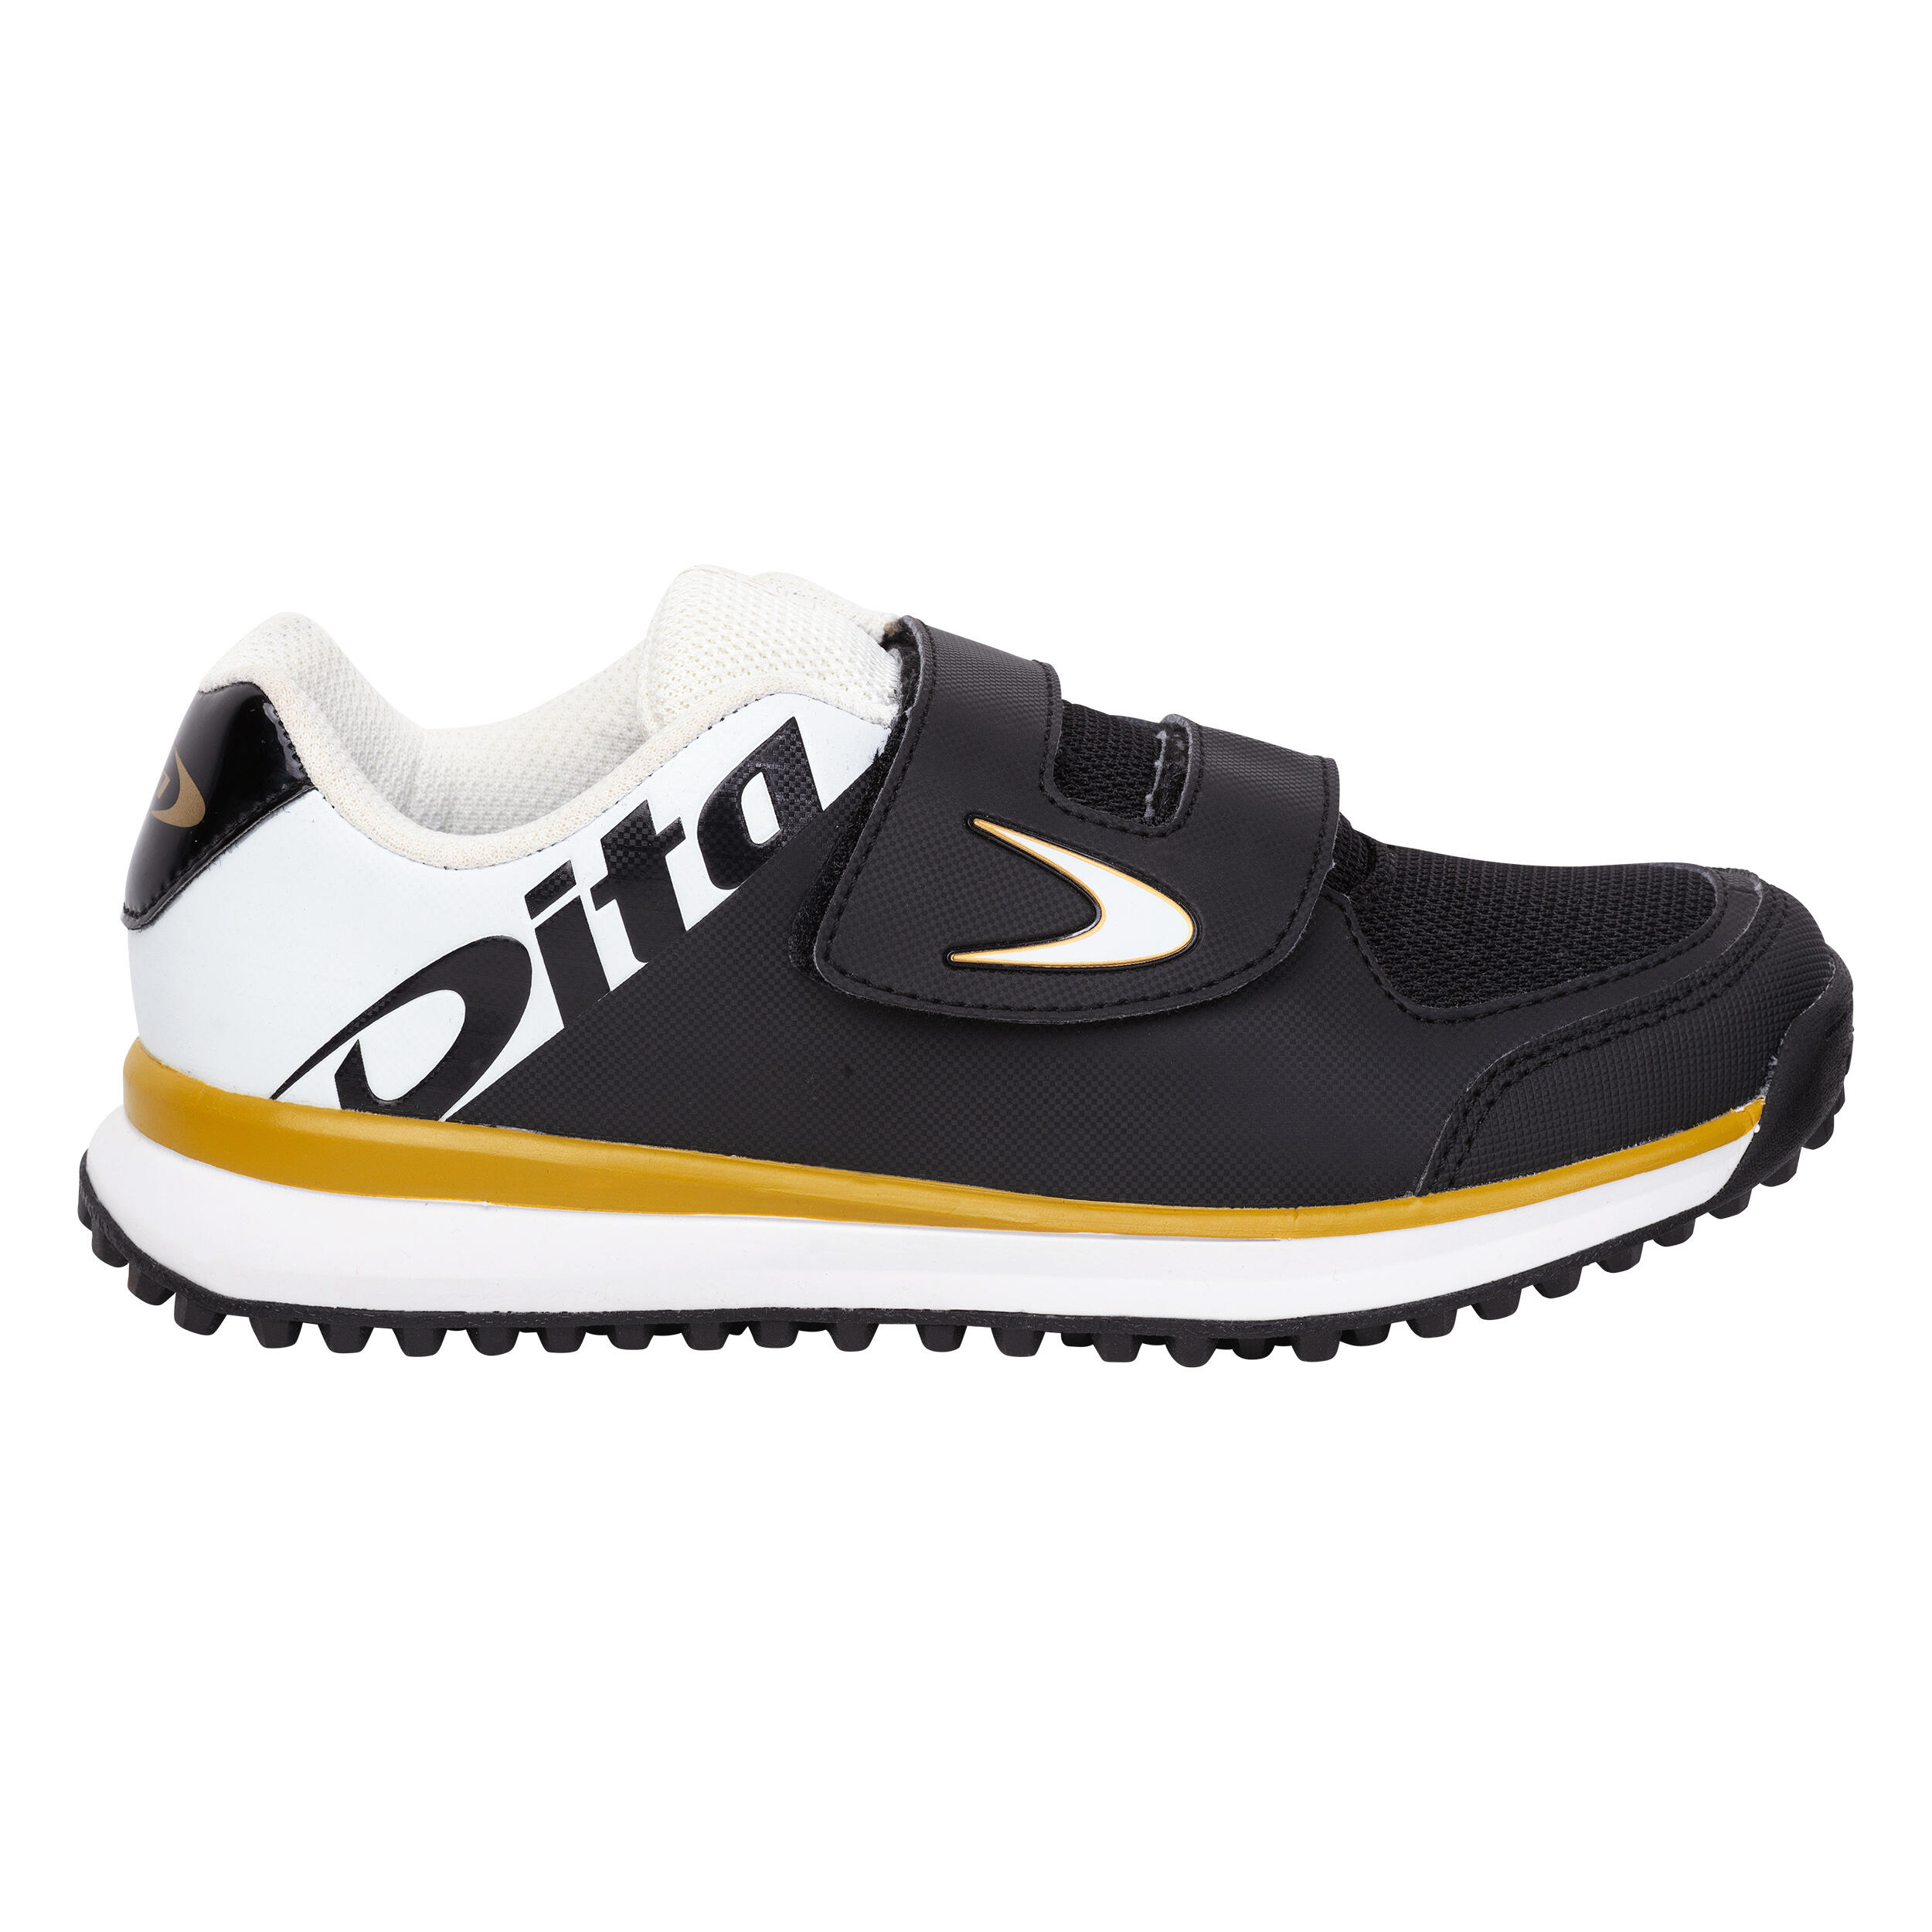 DITA Kids' Low-Intensity Field Hockey Shoes Fix And Go - White/Black